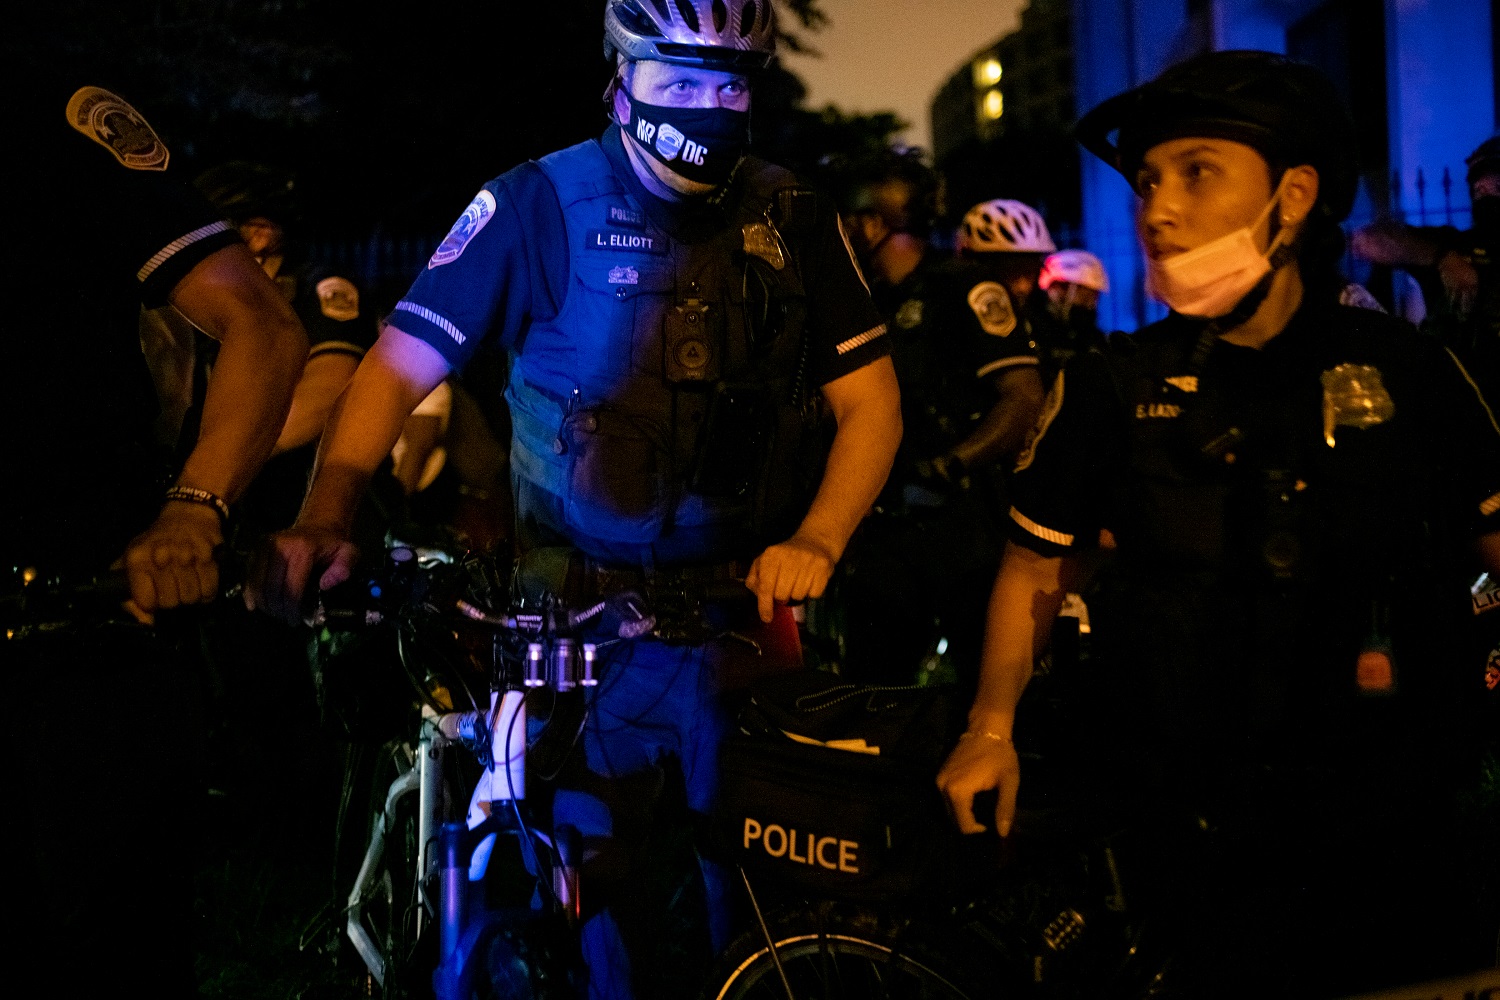 A police officer stares off in a tense moment during a protest against systemic racism and police violence in Washington, D.C., on a rainy August 15 2020, amid the coronavirus pandemic. After an incident earlier in the week that saw Washington Metropolitan Police arrest more than 40 protestors during an alleged riot that witnesses and reports say was a mostly peaceful demonstration, protesters - including many who had been recently released from jail with no charges - again marched across the city for an eleventh week. (Graeme Sloan/Sipa USA)No Use UK. No Use Germany.